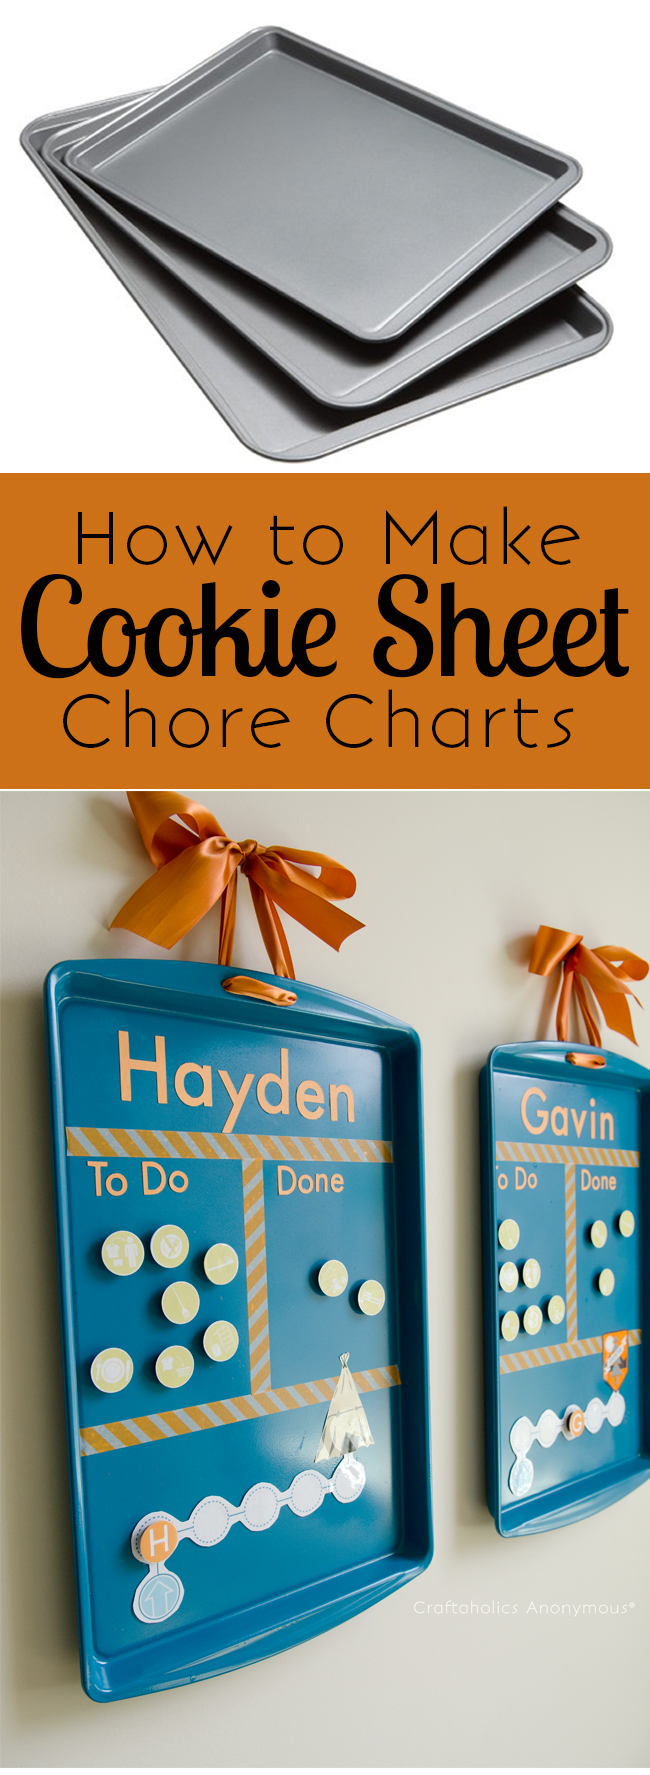 How to make Cookie Sheet Chore Charts. Cheap + easy to make. Love the magnet idea!